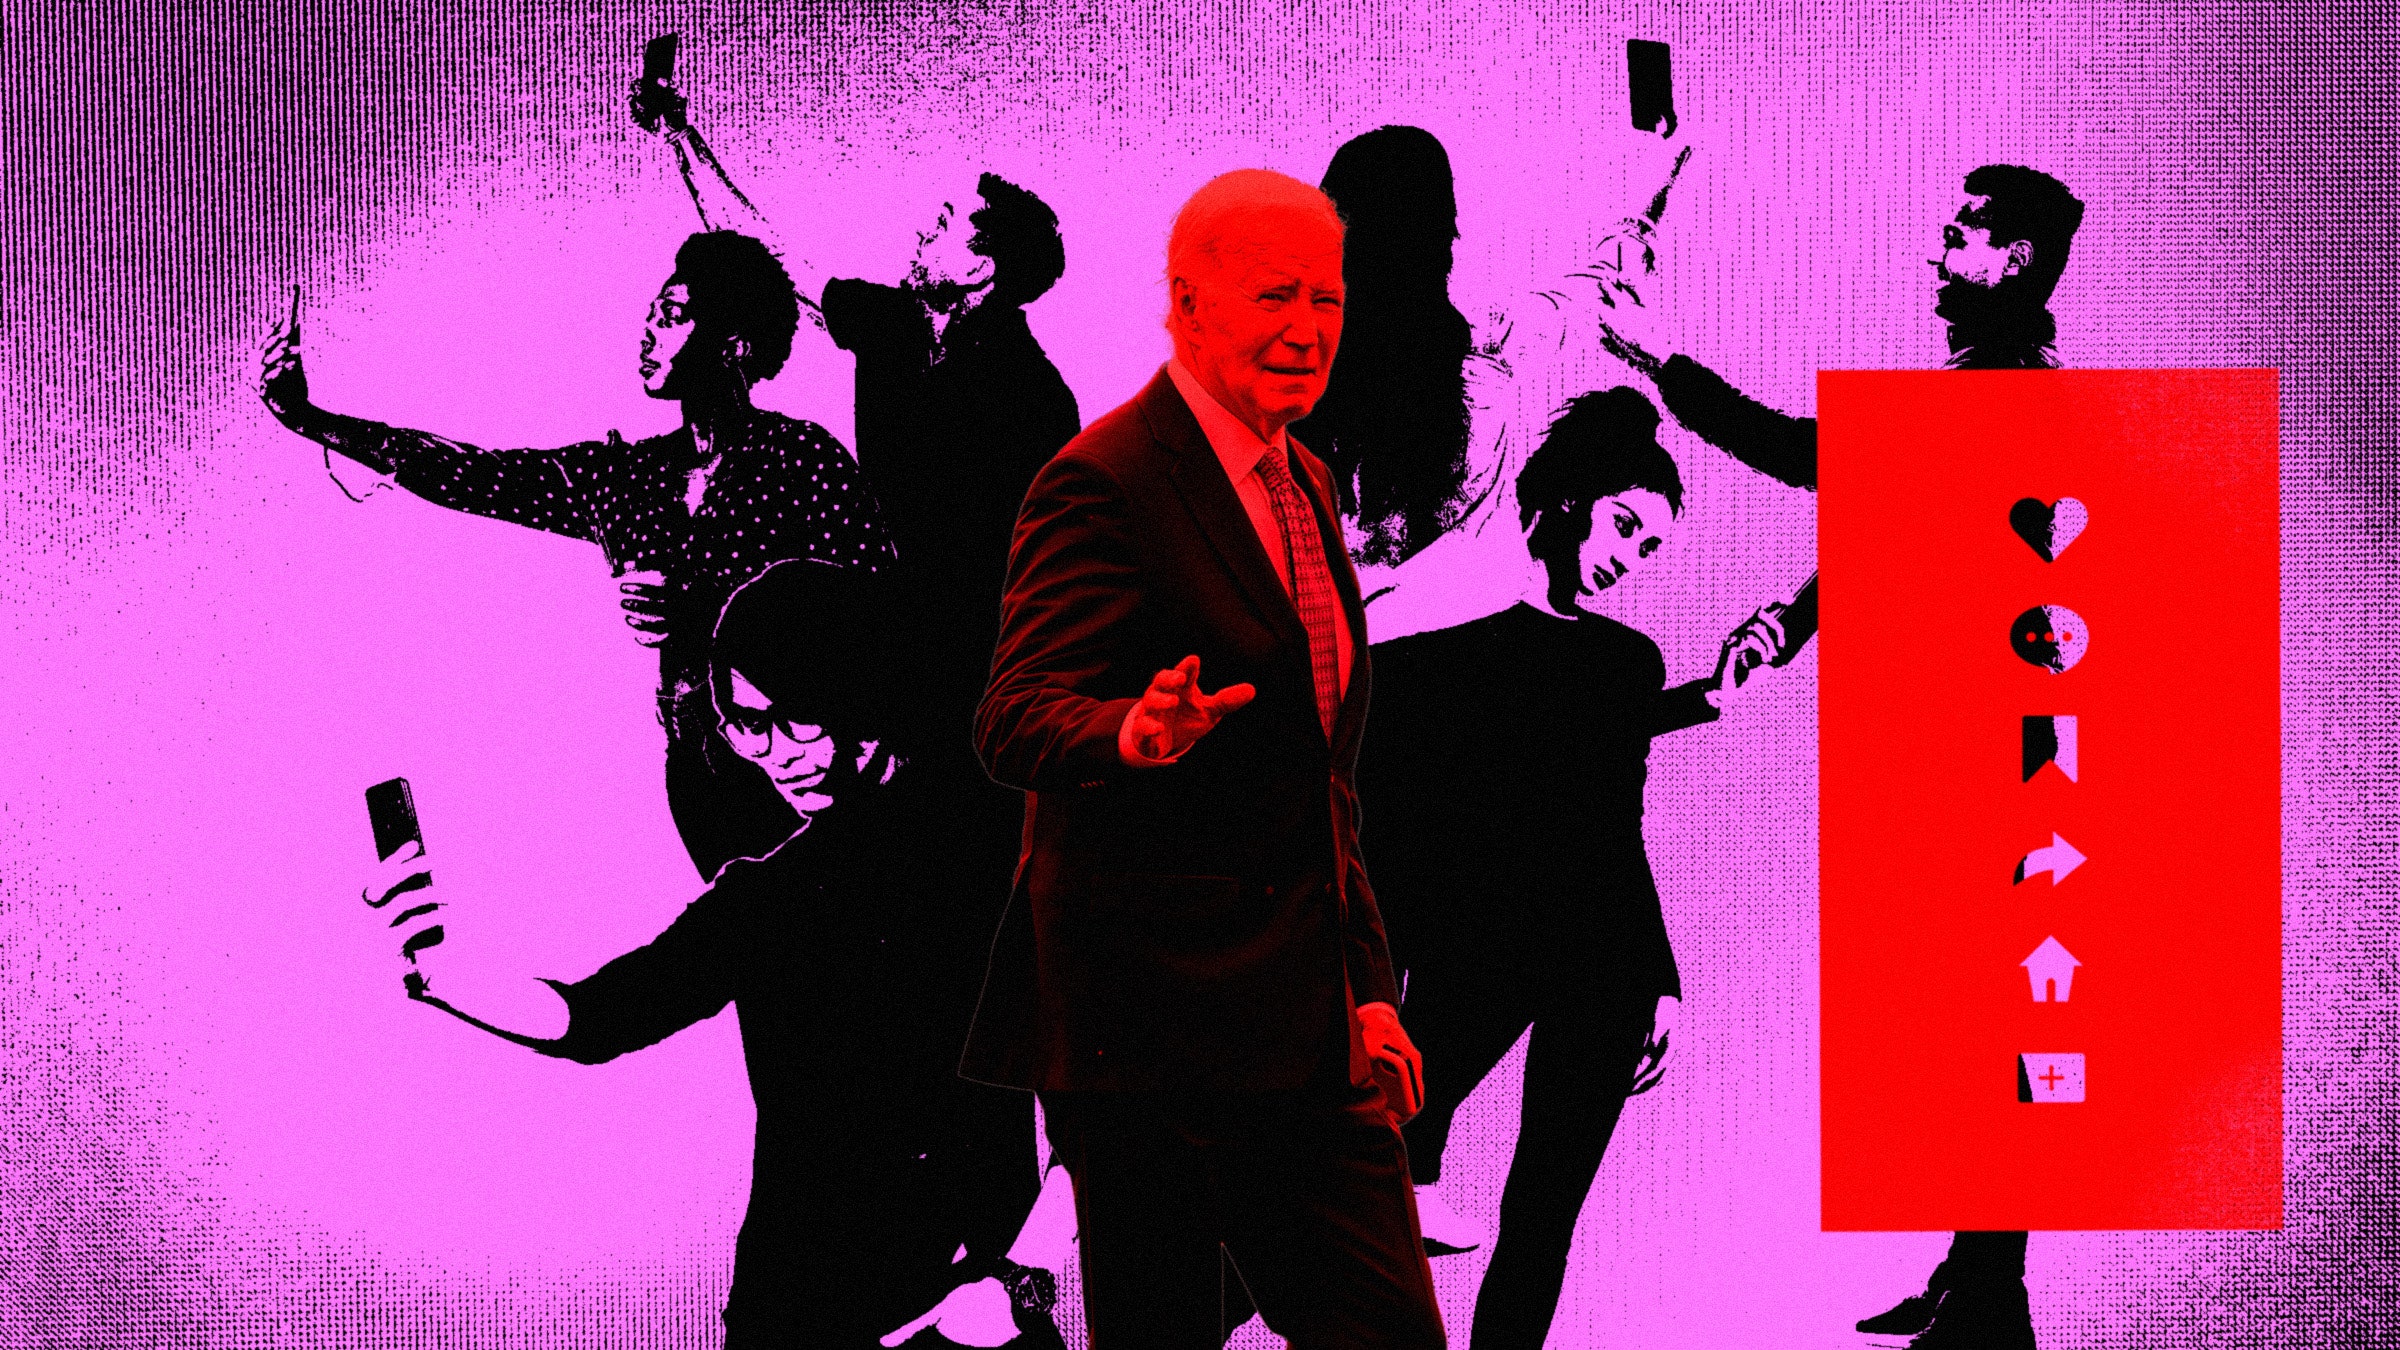 High contrast stylized graphic of Biden surrounded by people taking selfies